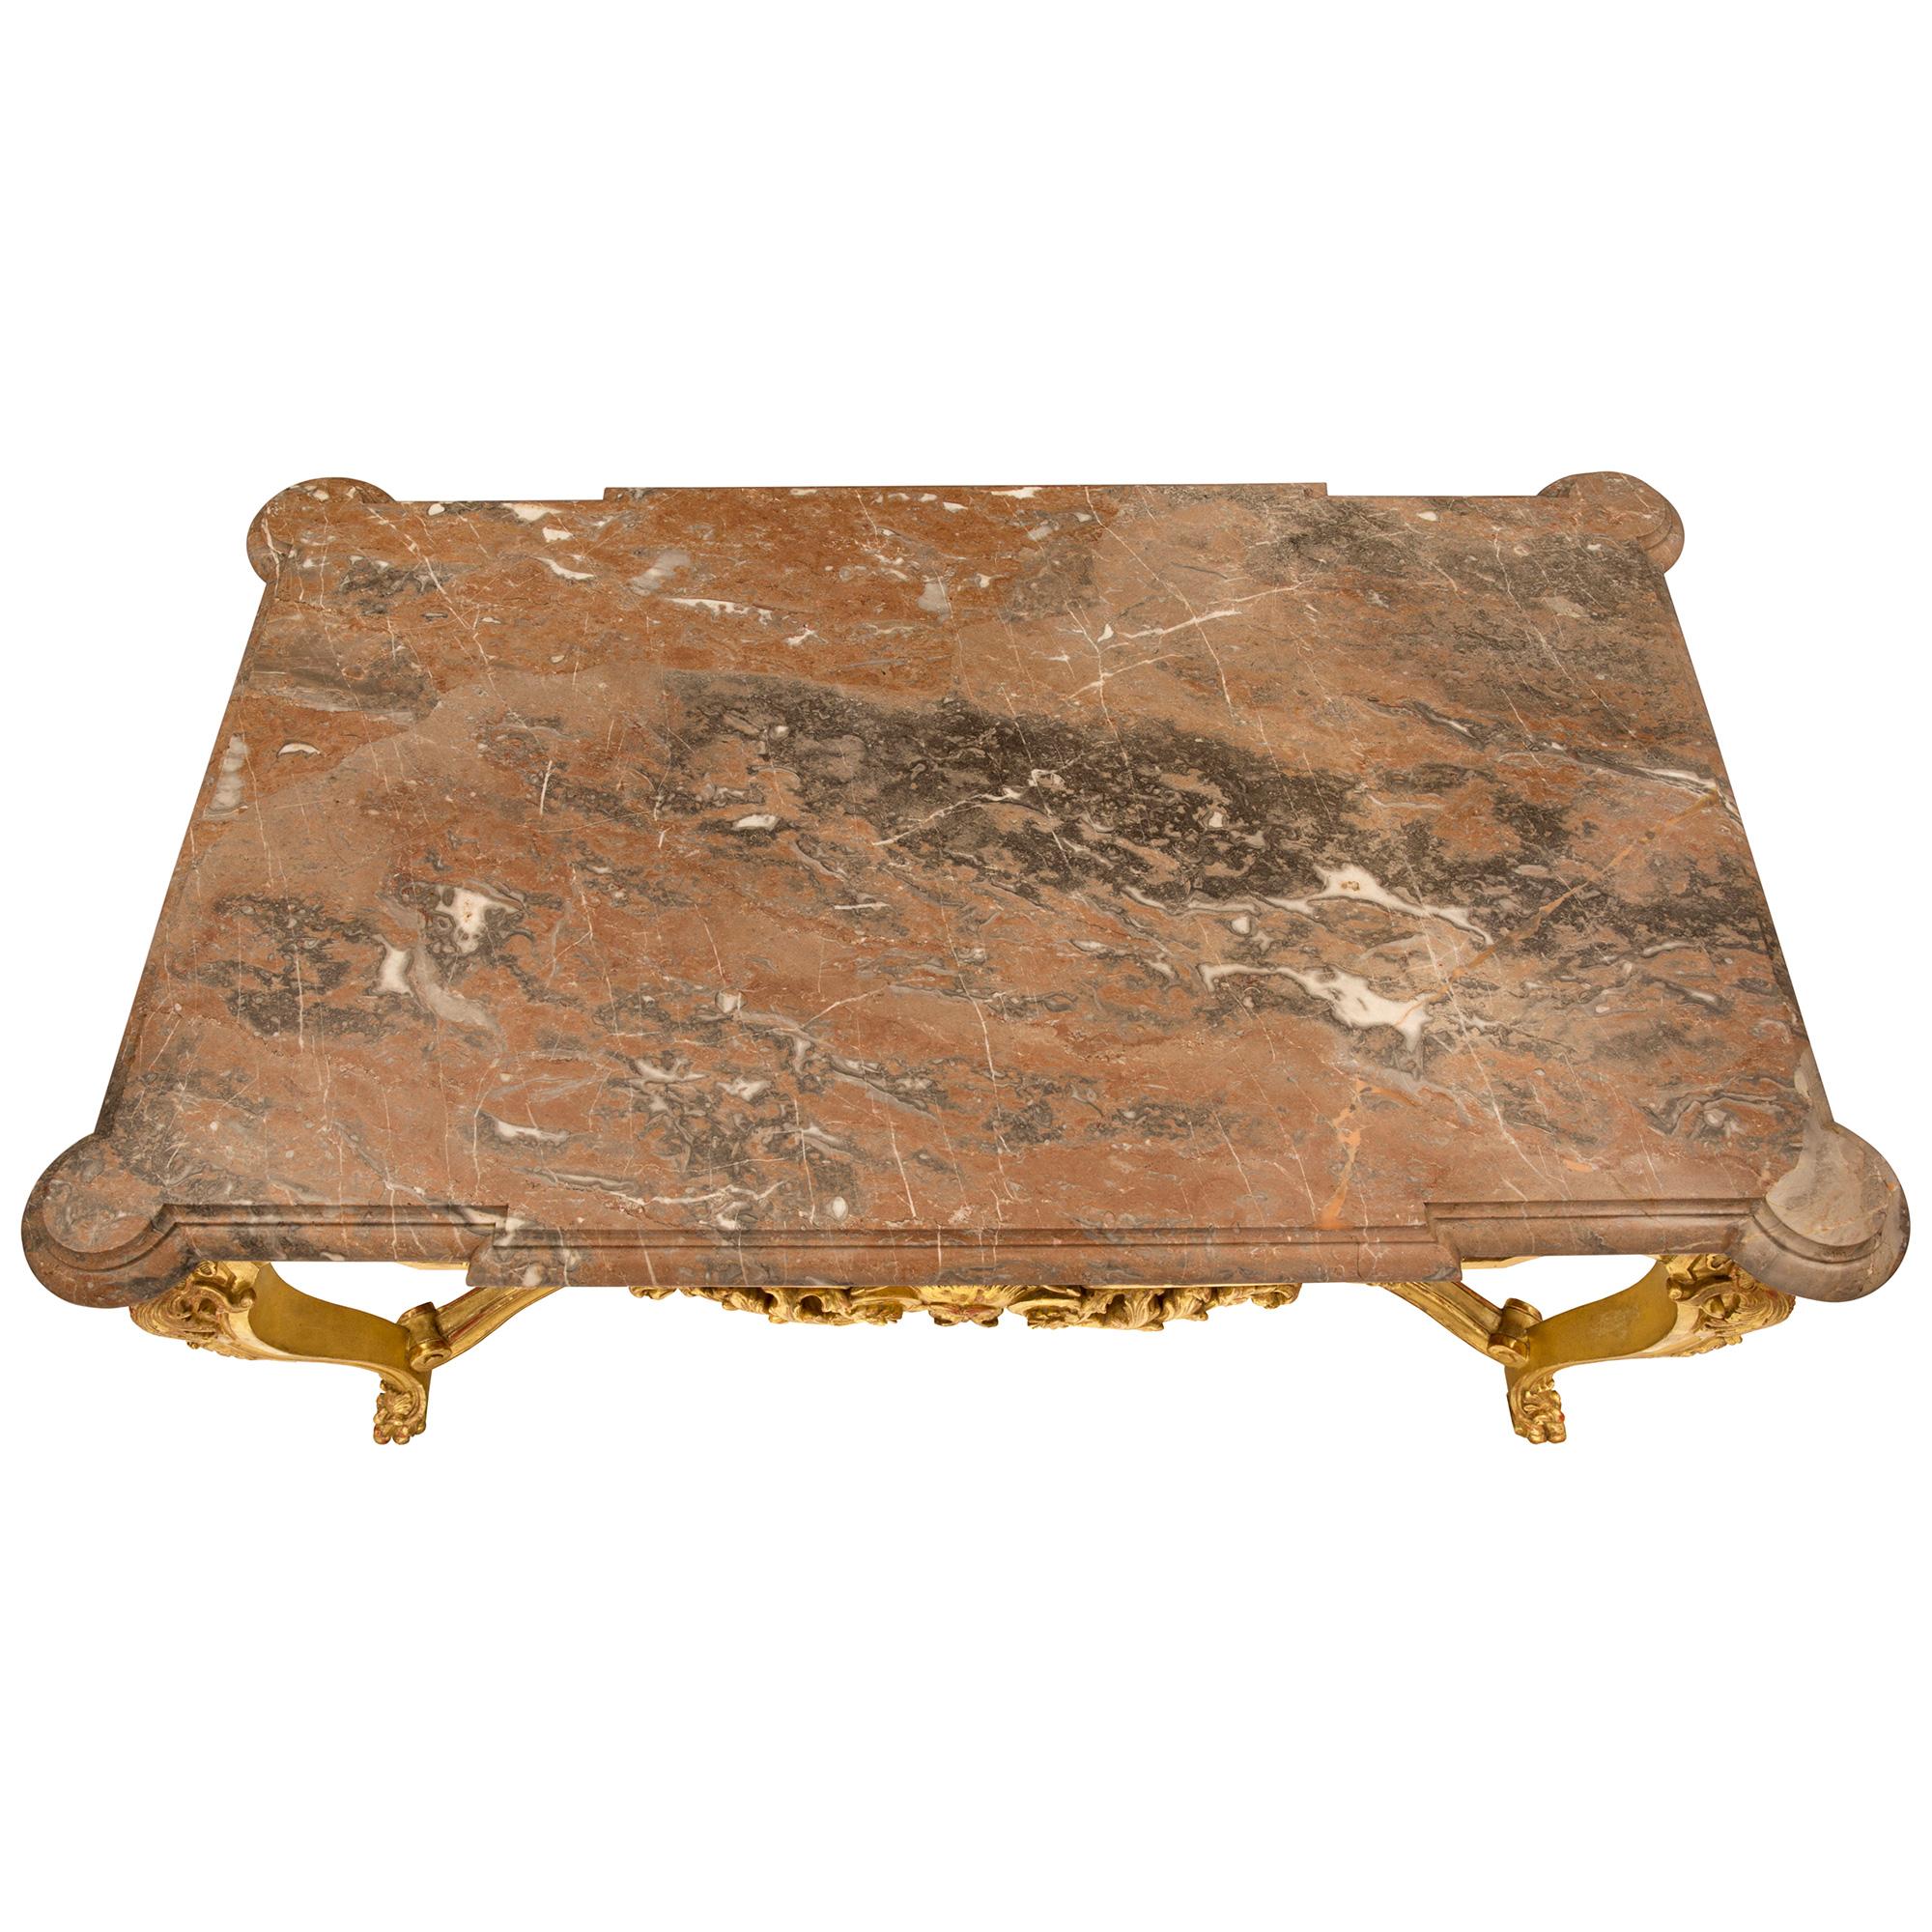 A spectacular French mid 19th century Régence st. giltwood and Rose Vif des Pyrenées marble center table. The rectangular table is raised by handsome paw feet with acanthus leaves below elegant cabriole shaped tapered legs adorned with richly carved